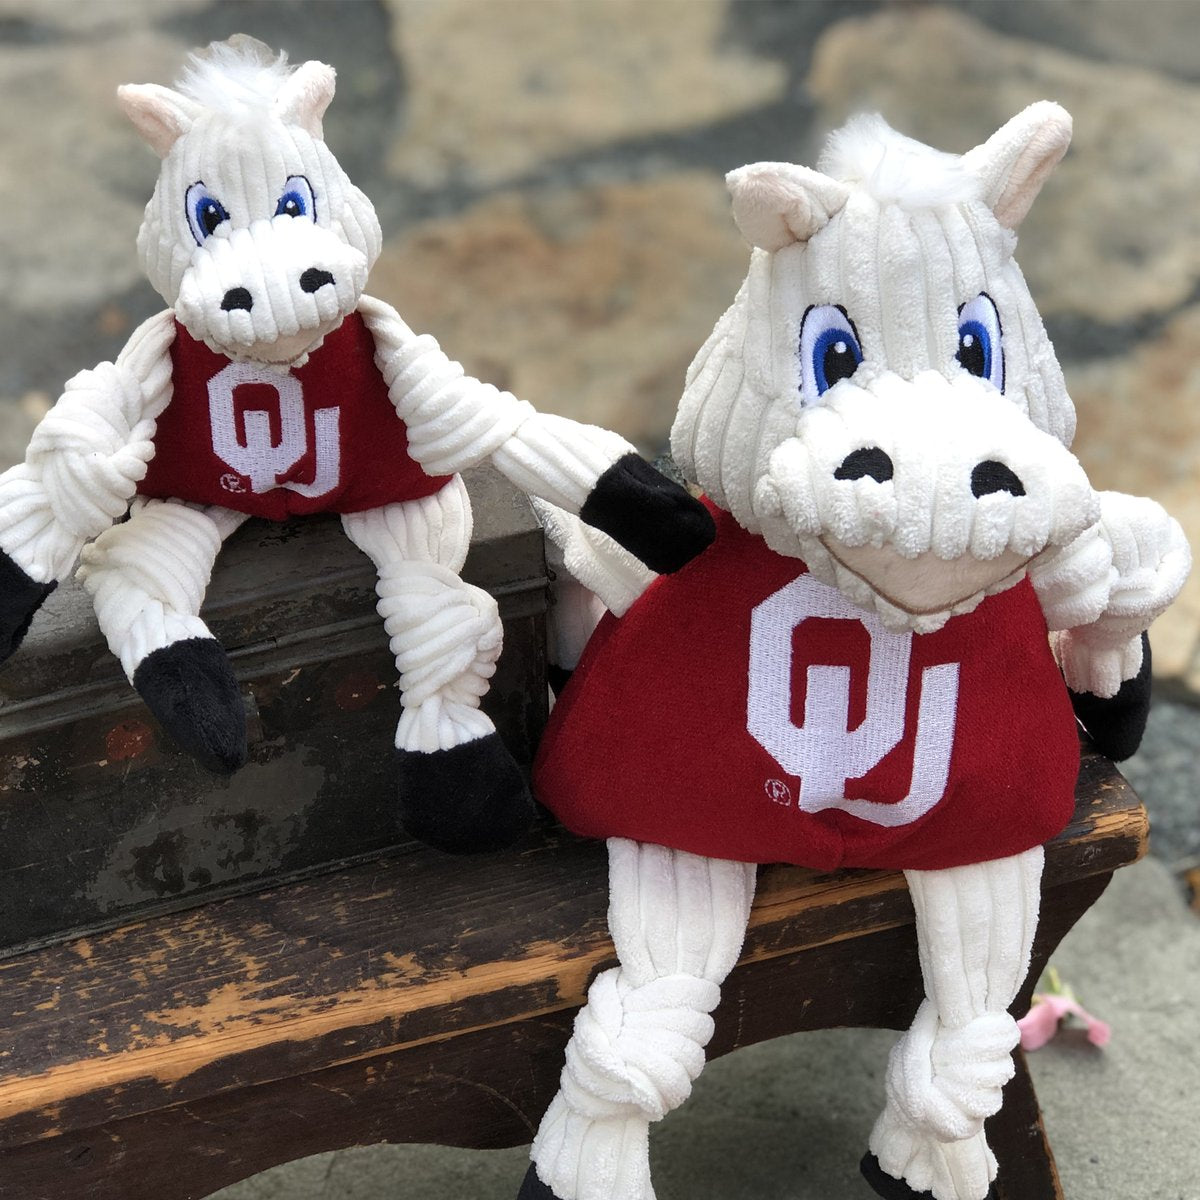 HuggleHounds Knottie Officially Licensed College Mascot Durable Squeaky Plush Dog Toy, Oklahoma Sooners